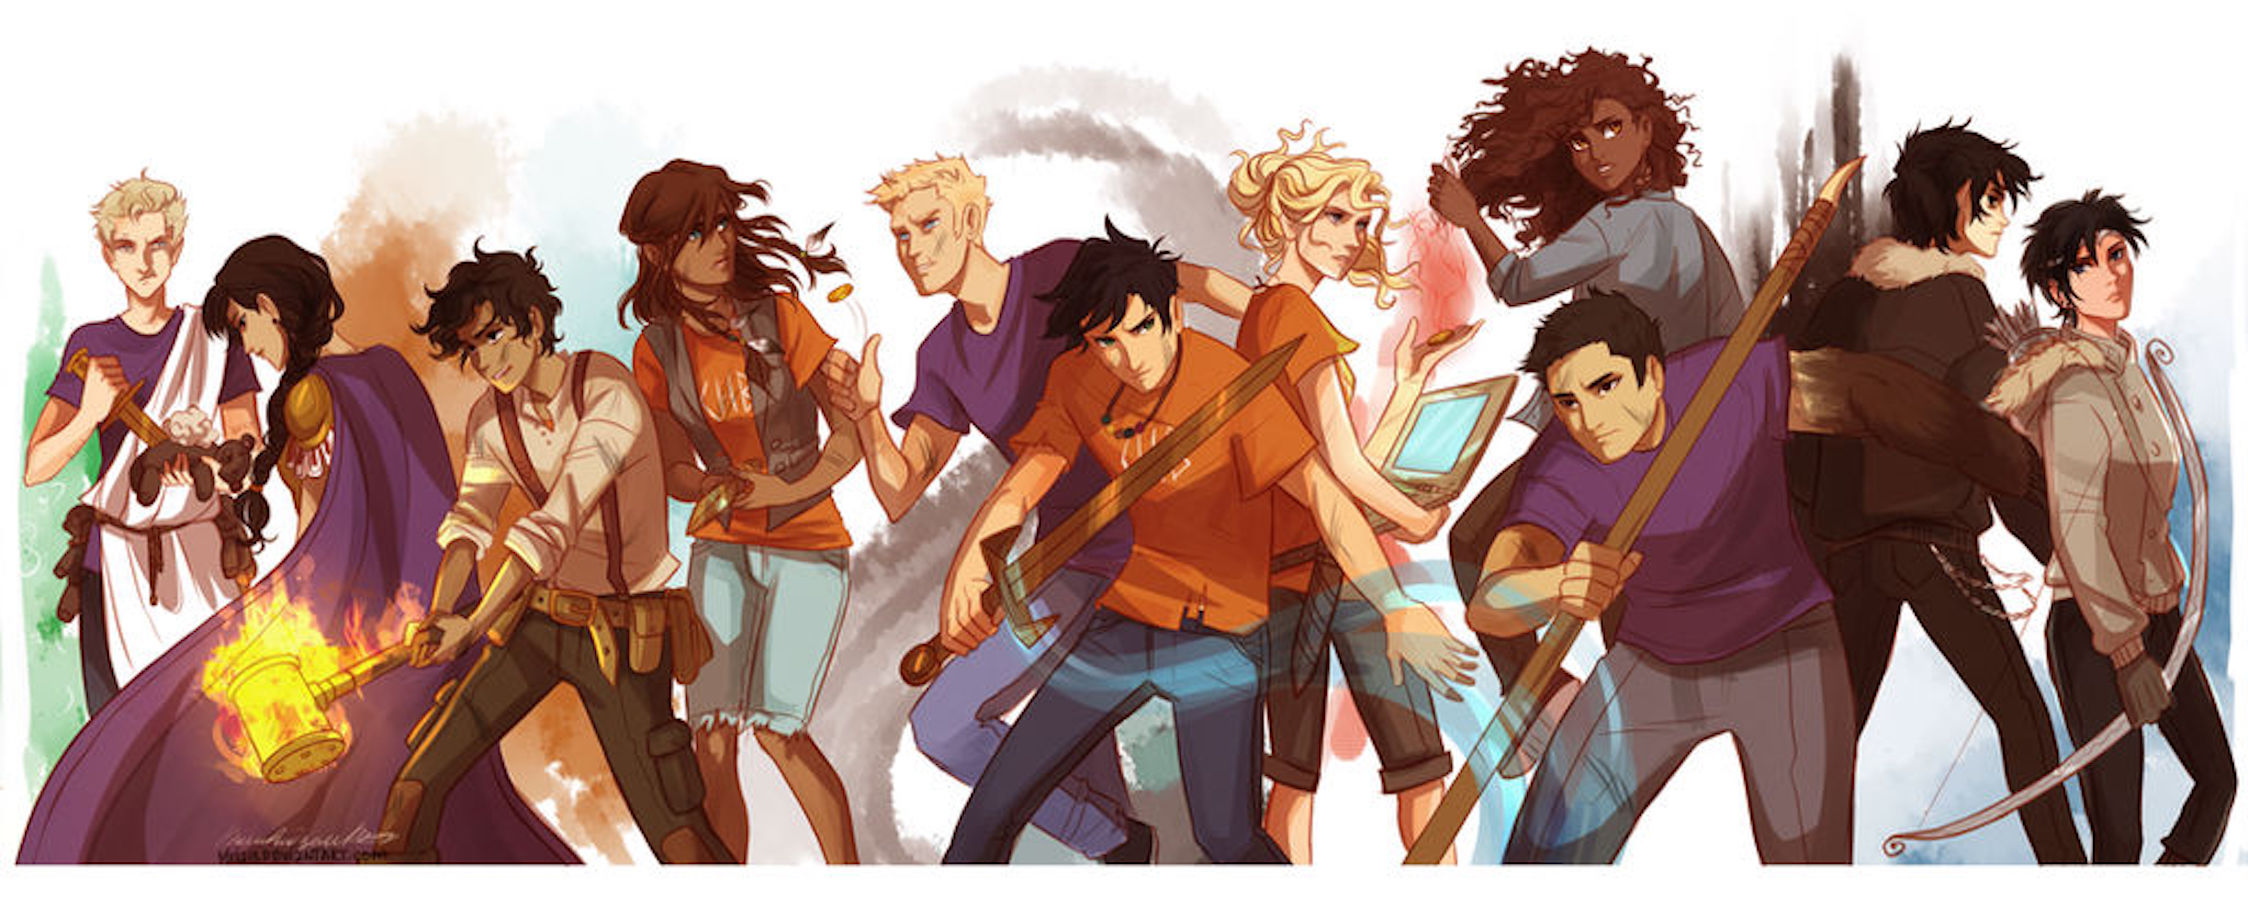 Fan art of characters from Riordan's "Heroes of Olympus" series standing next to one another in fighting stances.